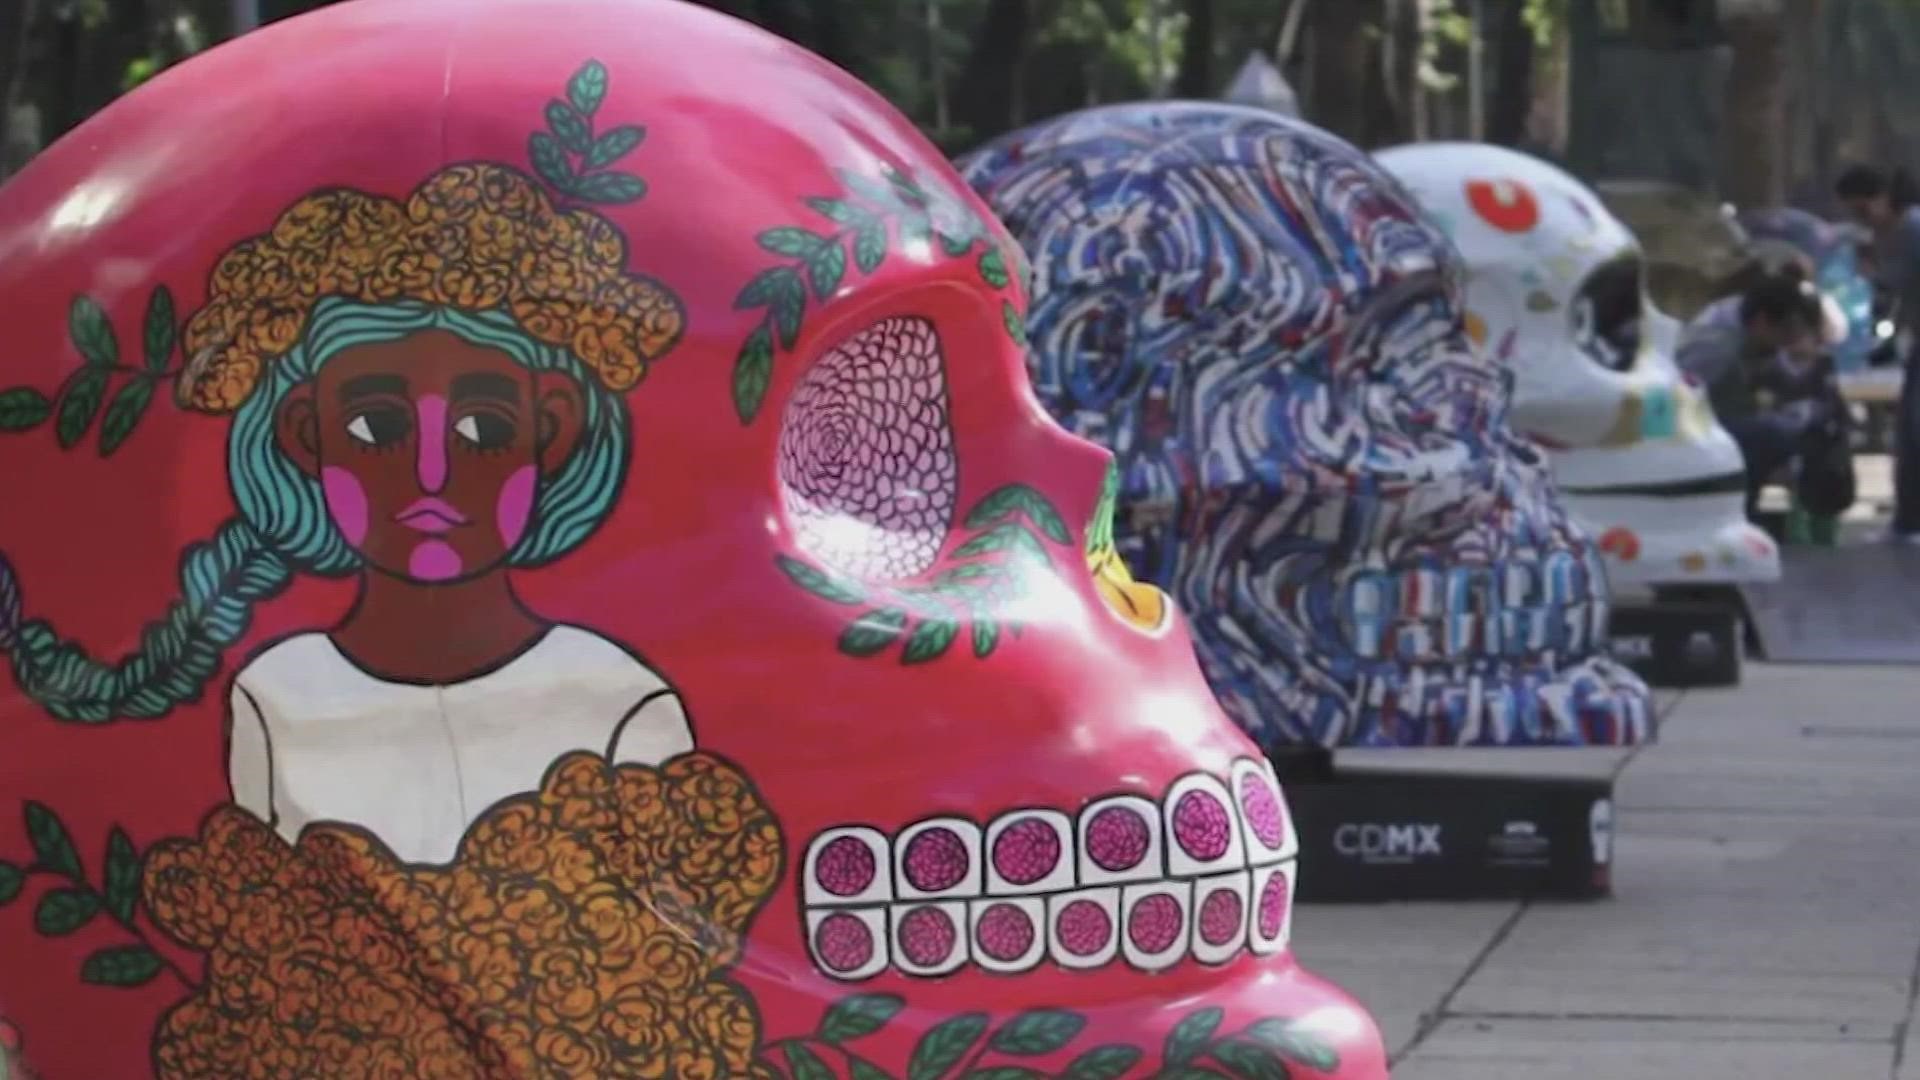 An eye-catching art display featuring skulls is now on display in Discovery Green to celebrate The Day of the Dead.